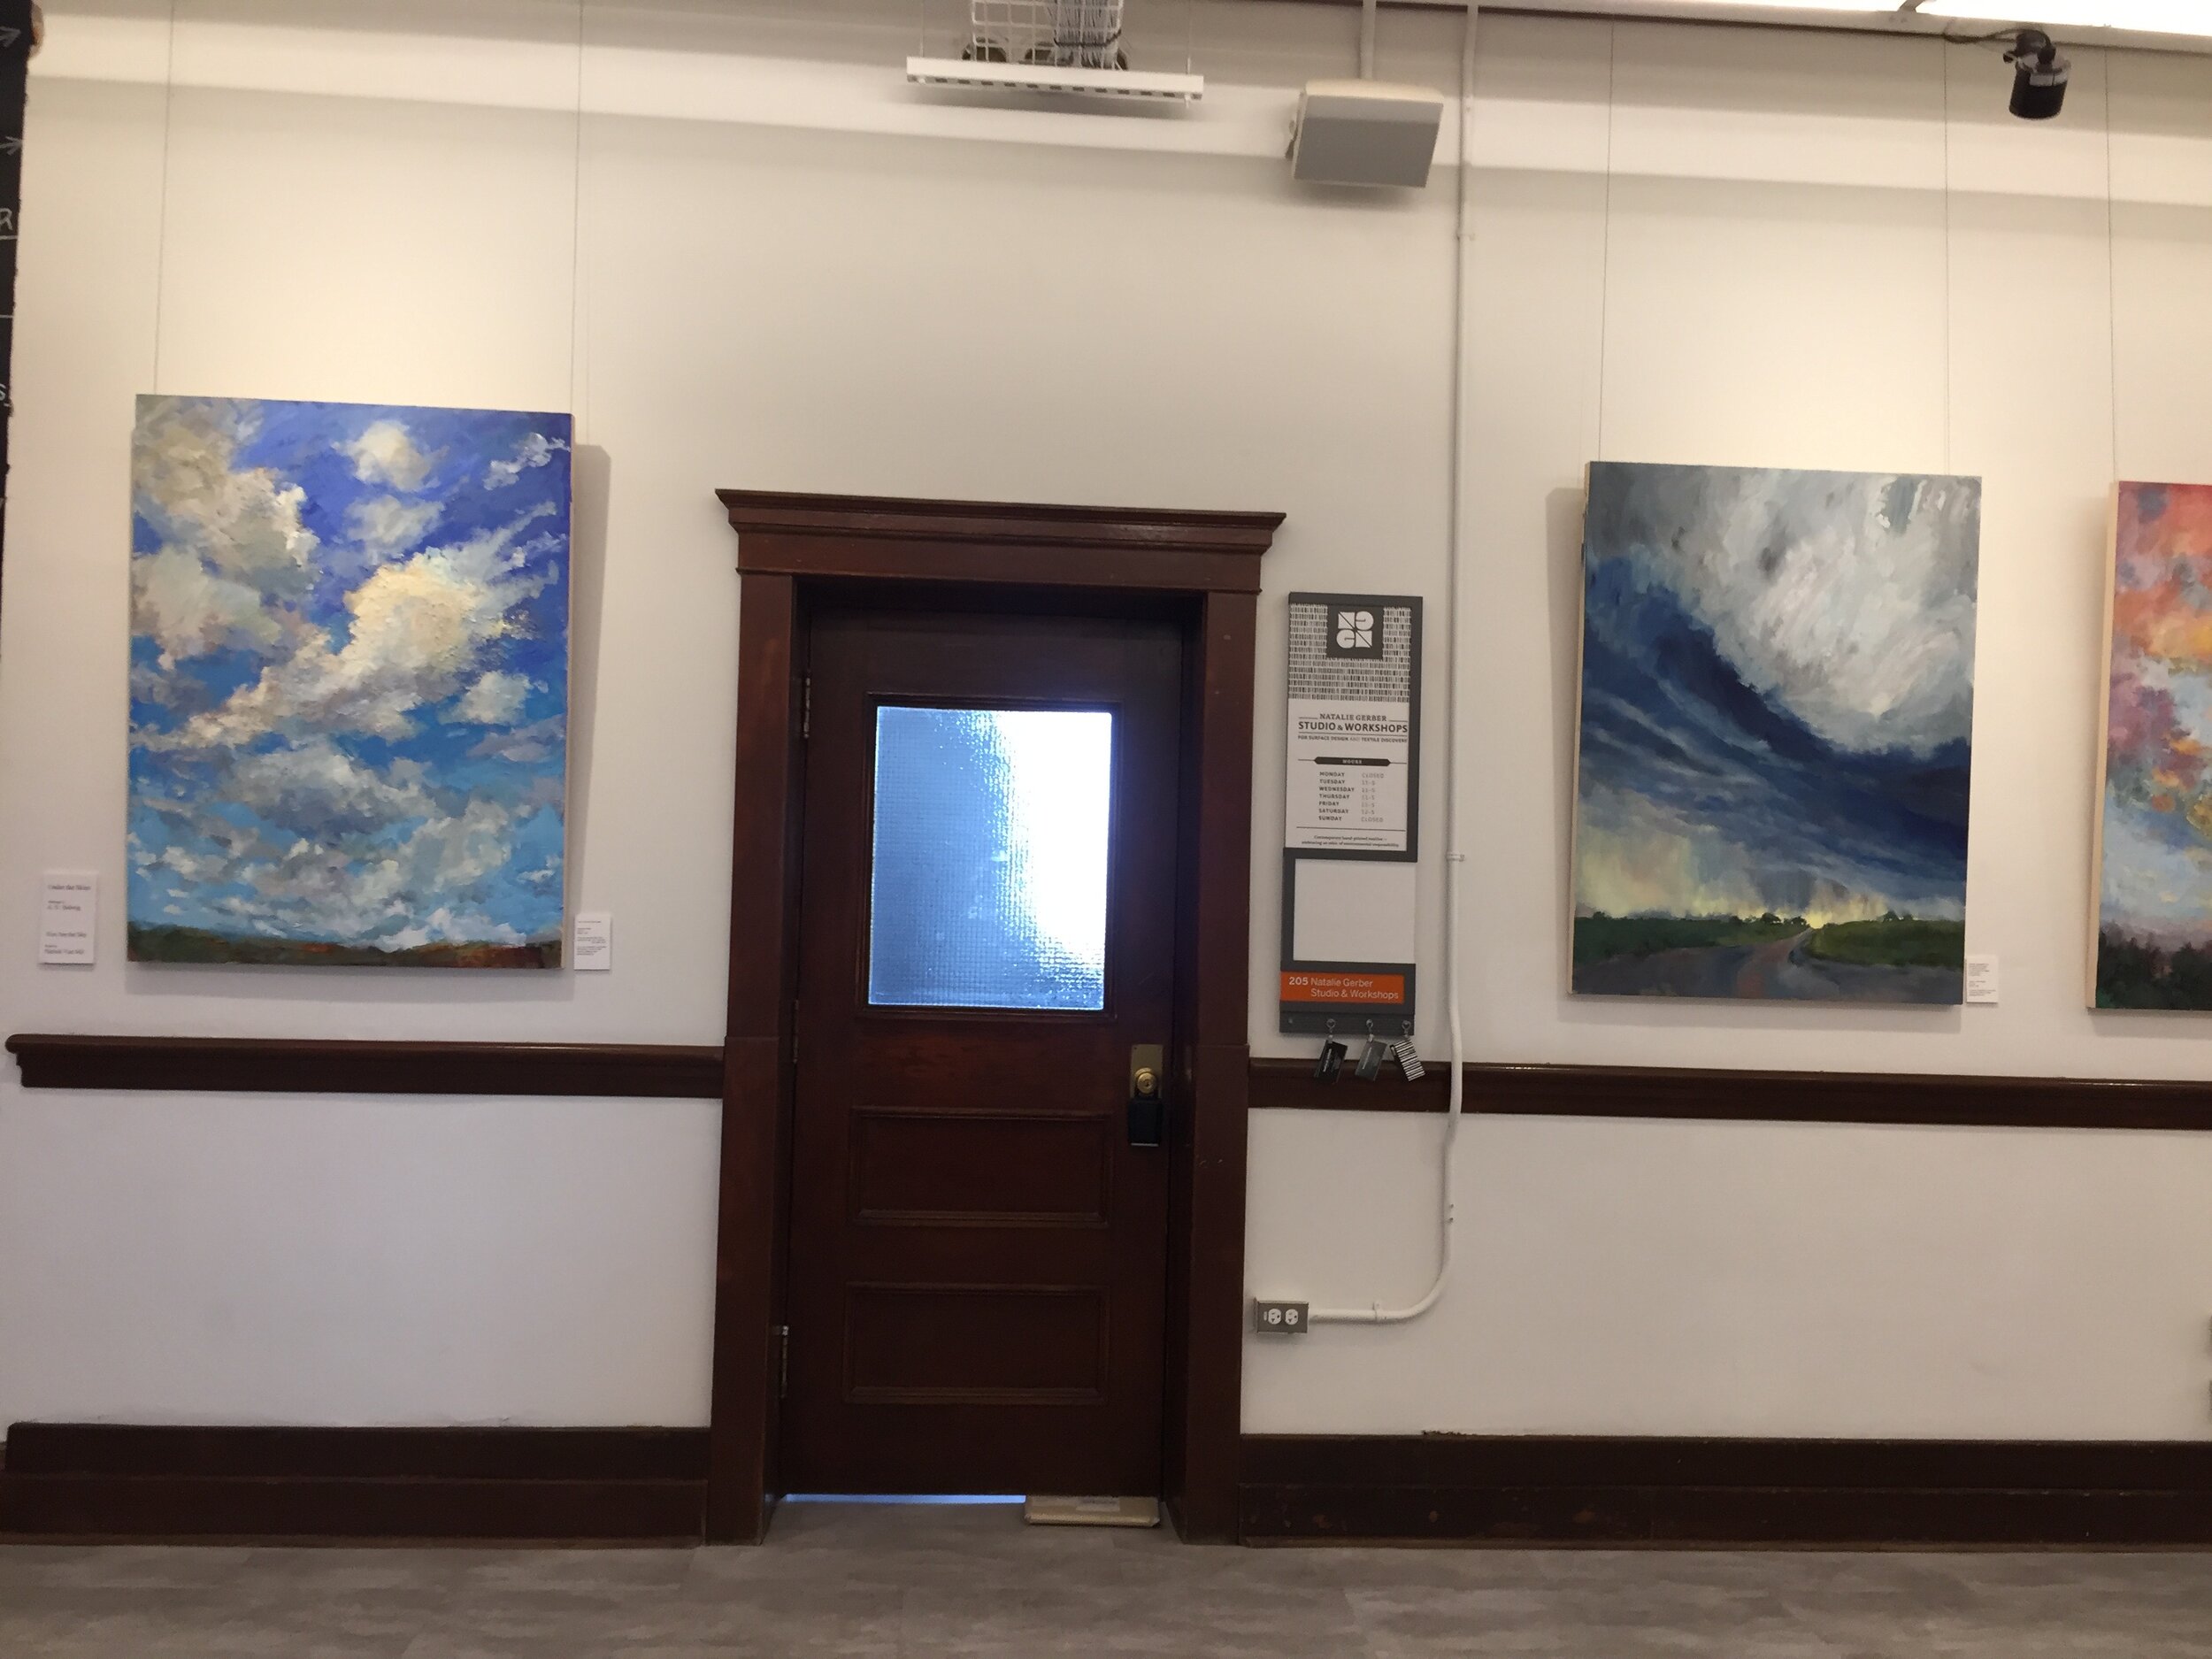  Under My Skies Show at cSPACE, Calgary, Alberta  Right to left— Under My Skies, Time to Take Shelter.  Collection of the Artist, available. 